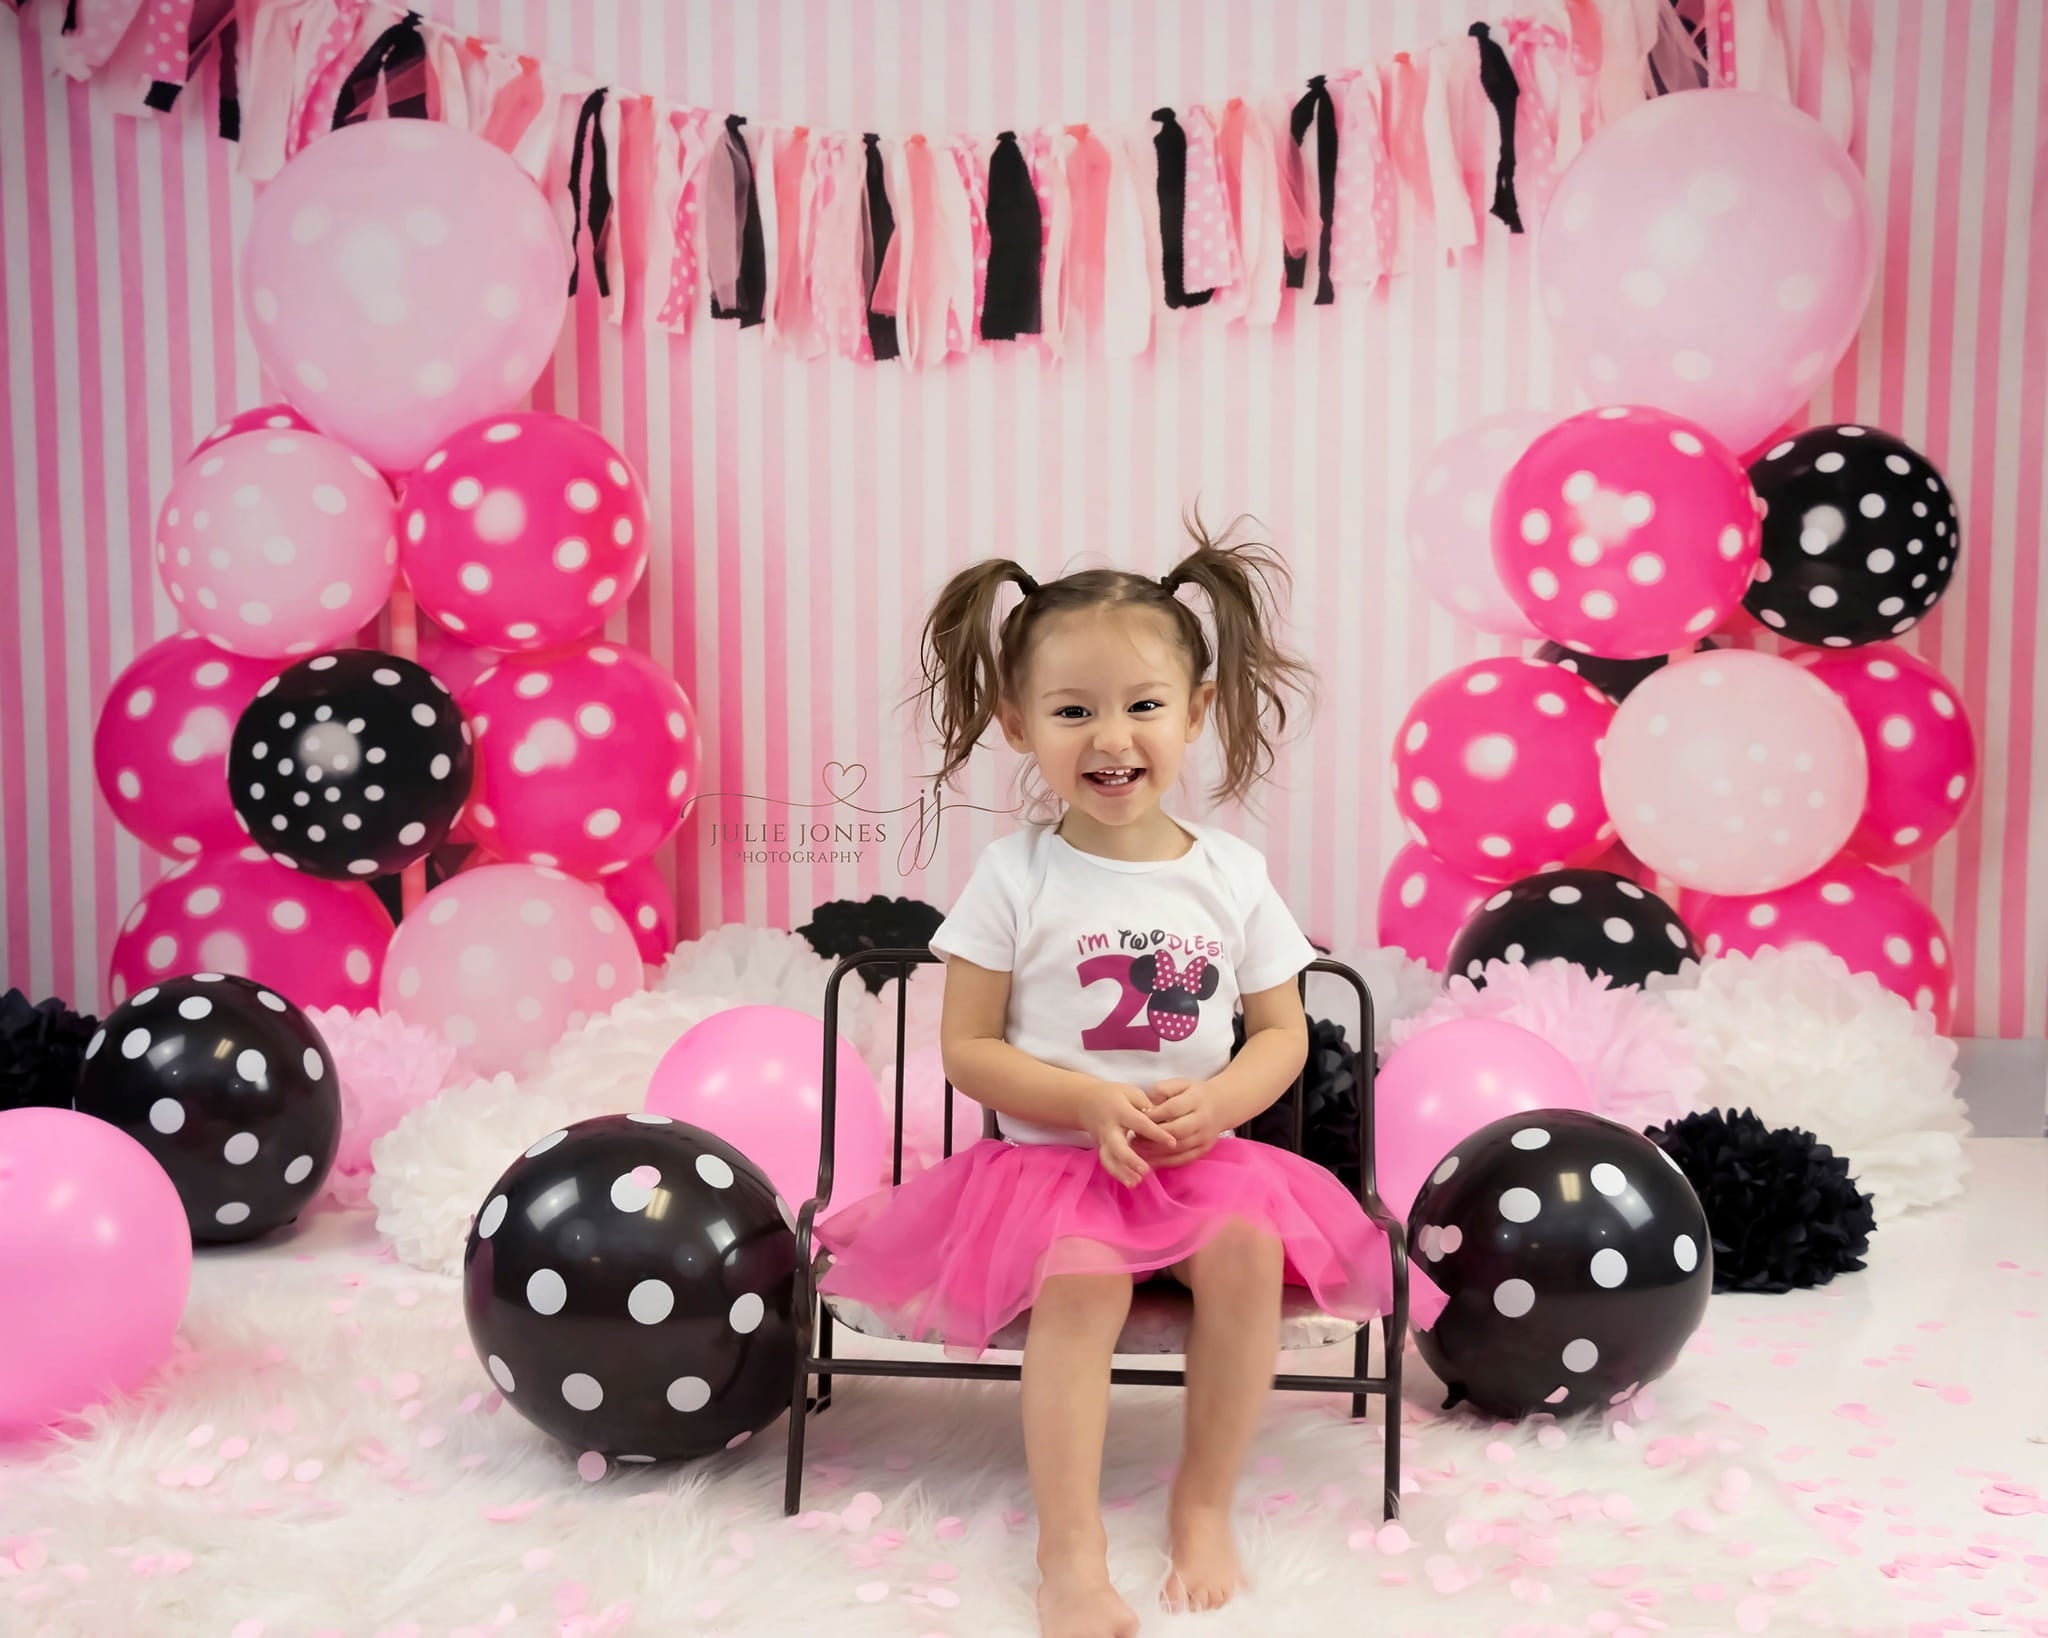 RTS Kate Black Pink Balloons with Strips for Children Backdrop for Photography (U.S. only)